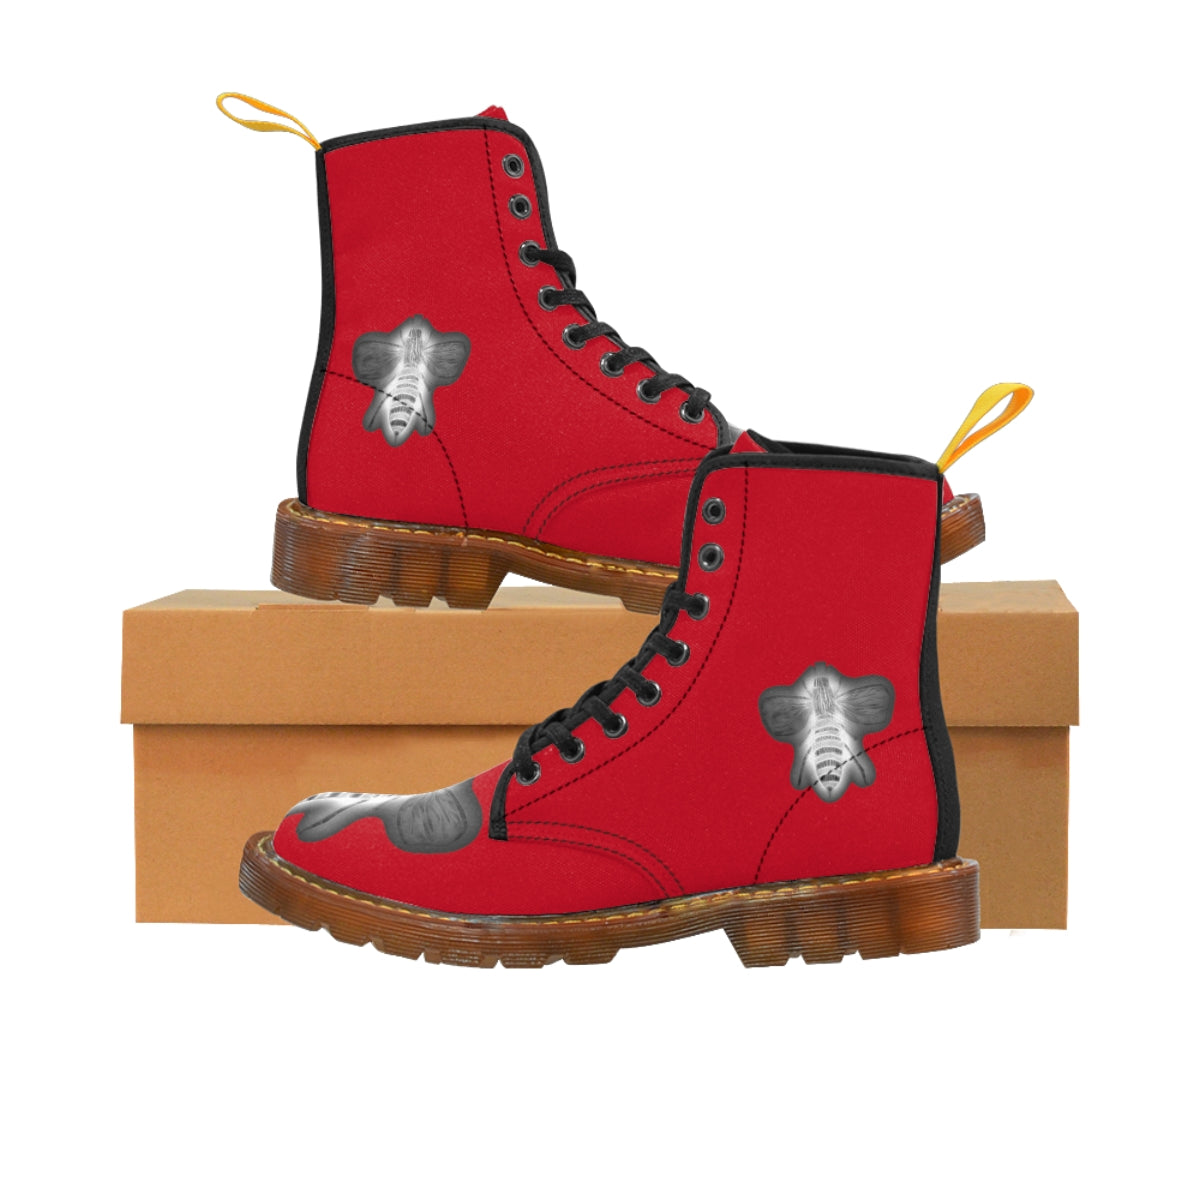 Negative Bee Women's Red Canvas Boots Brown Shoes Bee boots combat boots fun womens boots Negative Bee original art boots Shoes unique womens boots vegan boots vegan combat boots womens boots womens fashion boots womens red boots